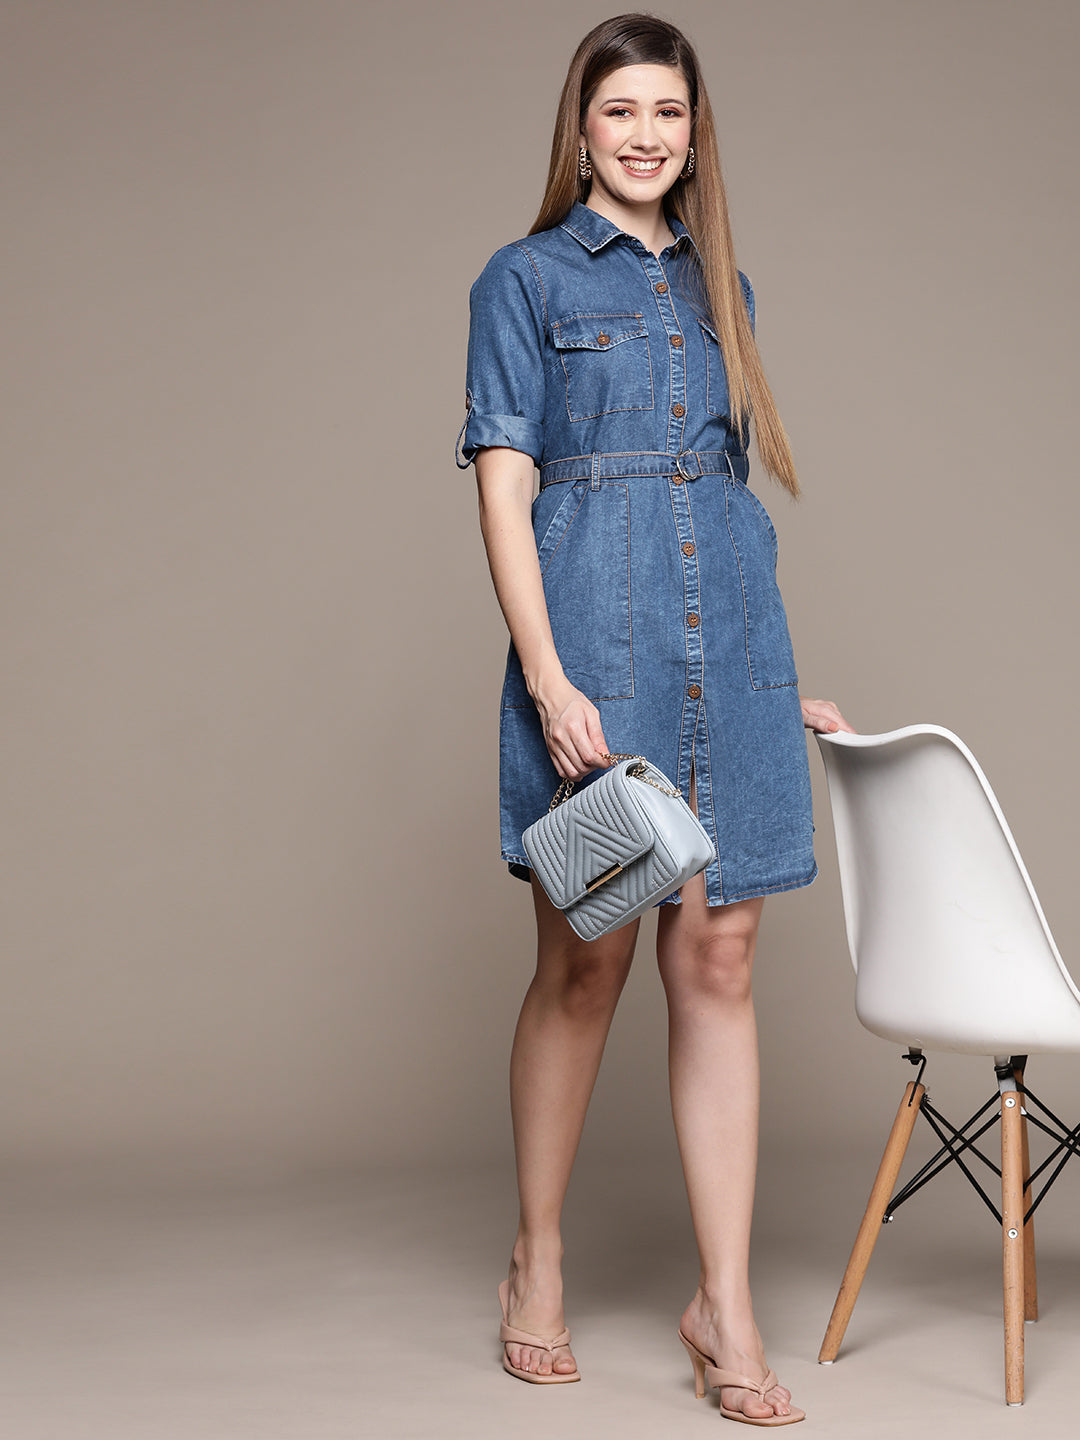 My Weekend Citi Trends Denim Shirt Obsession! - Just Brennon Blog